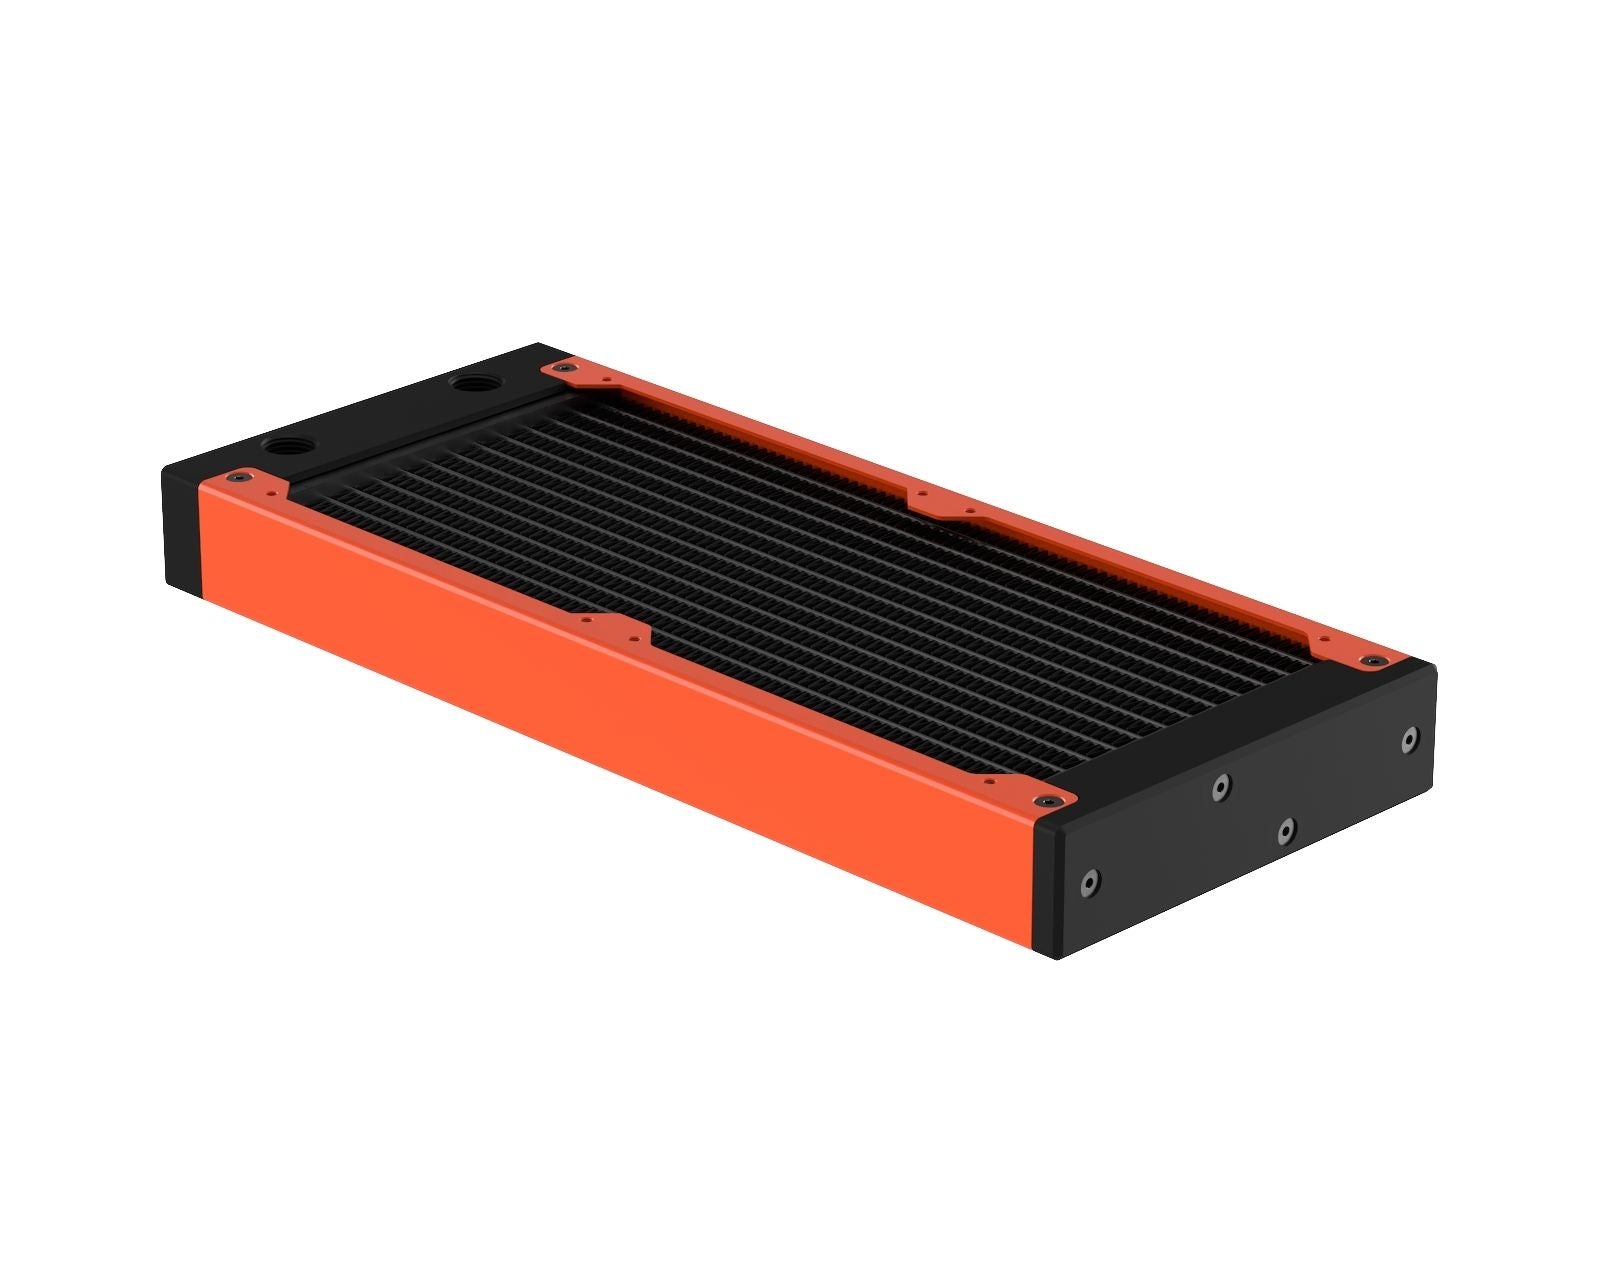 PrimoChill 240SL (30mm) EXIMO Modular Radiator, Black POM, 2x120mm, Dual Fan (R-SL-BK24) Available in 20+ Colors, Assembled in USA and Custom Watercooling Loop Ready - UV Orange